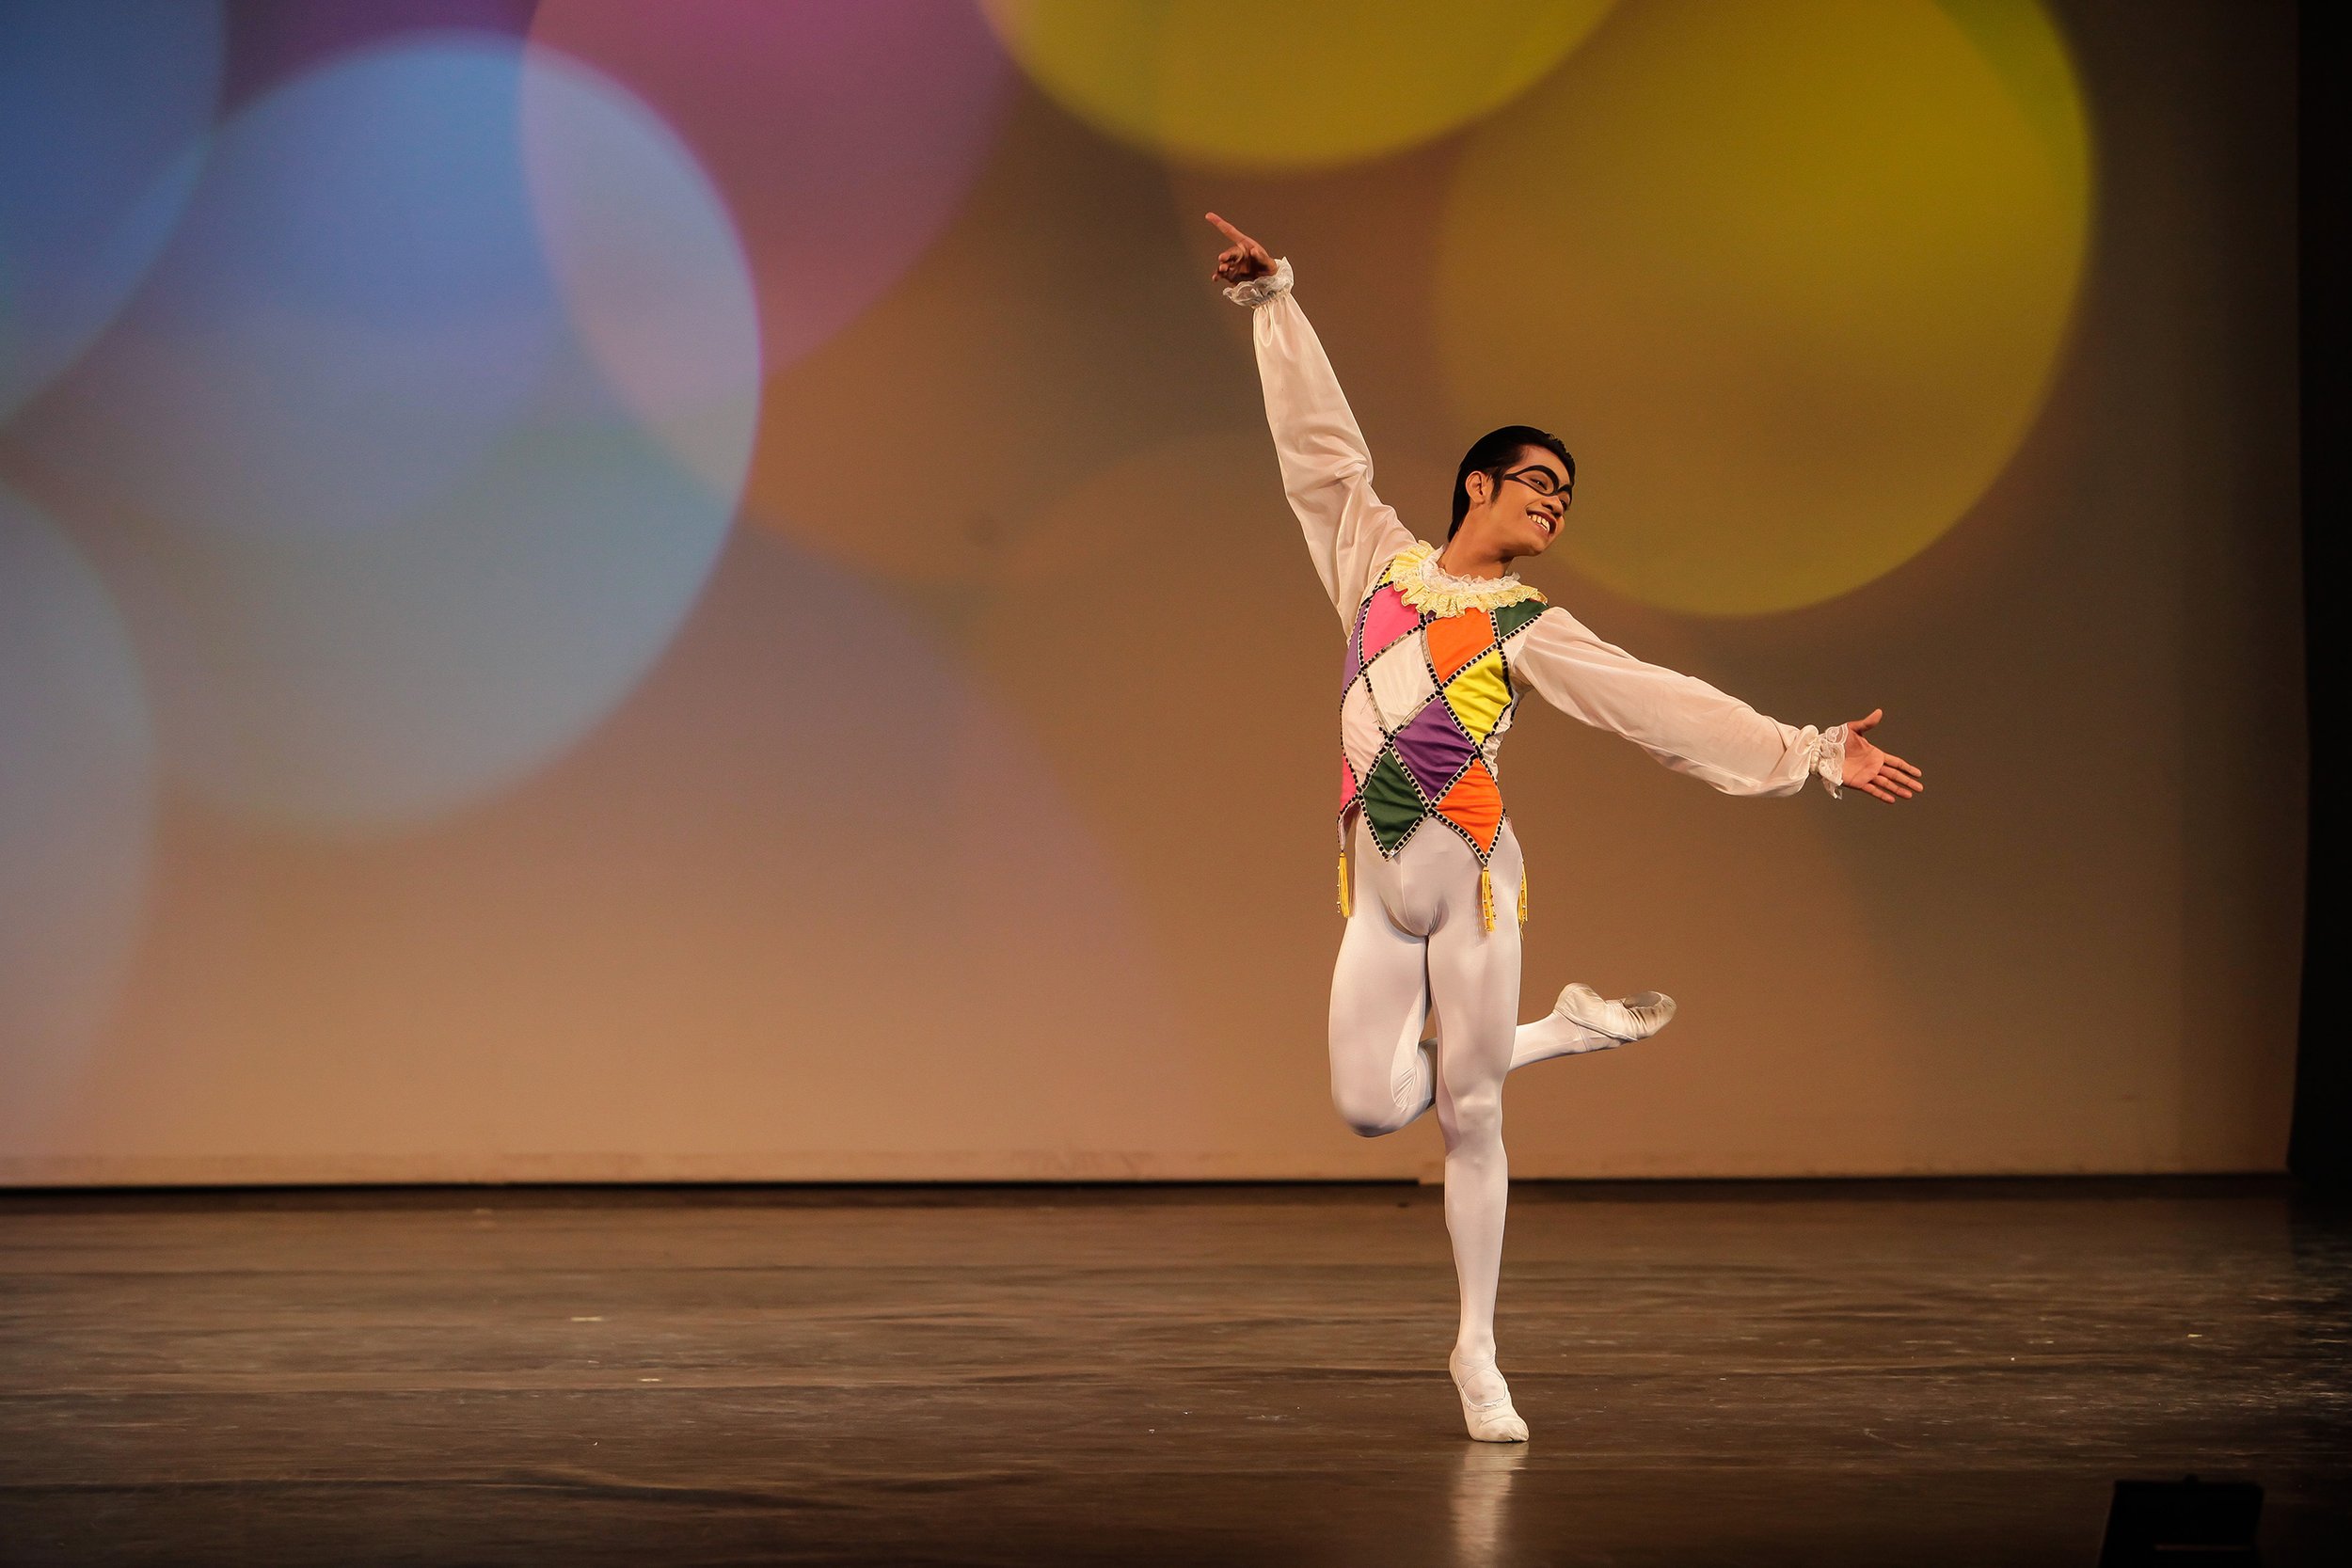    With his easy grin and mischievous ways, the harlequin (Anselmo Dictado) gets attention, specially from his partner, in the  Harlequinade  pas de deux. In the 2014 production  Heart to Heart: Ballet &amp; Ballads , three couples alternated in the 